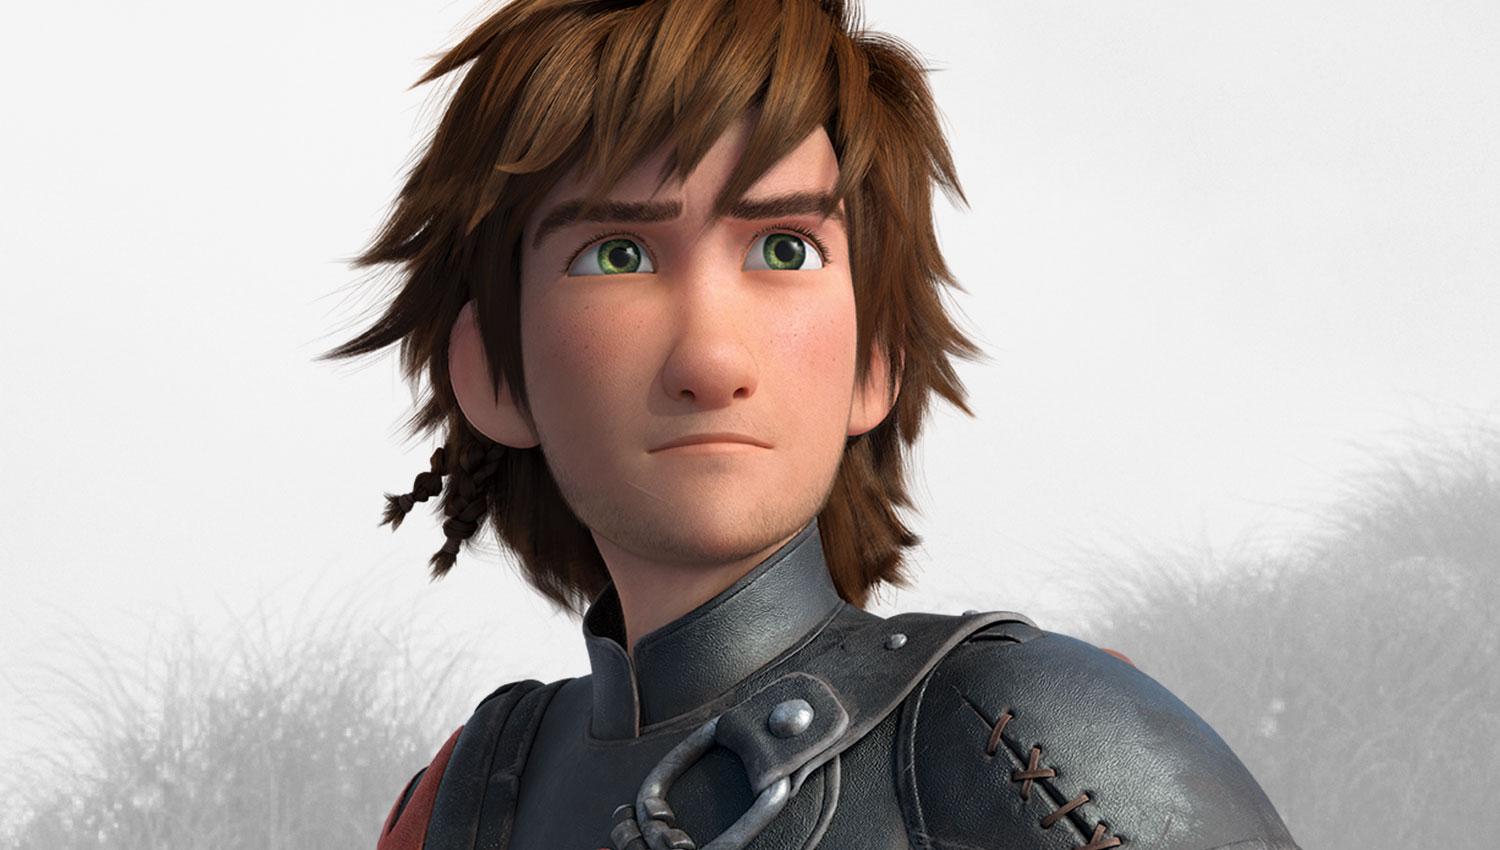 How to Train Your Dragon image Hiccup Horrendous Haddock III HD